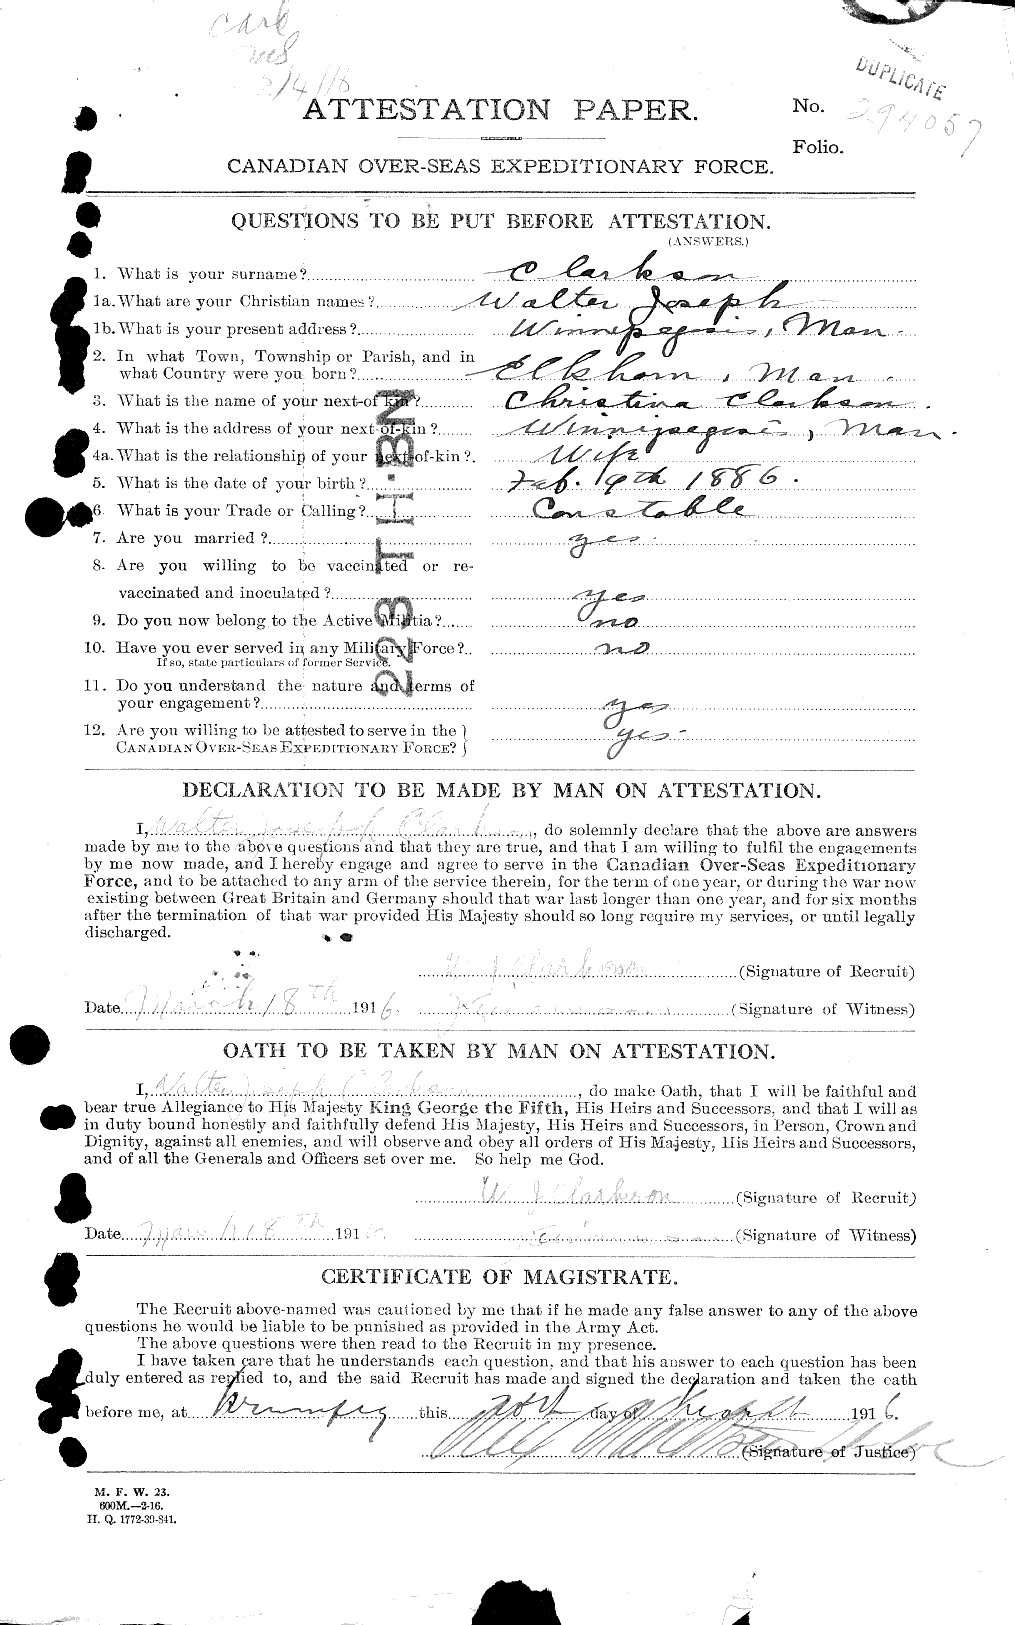 Personnel Records of the First World War - CEF 019016a